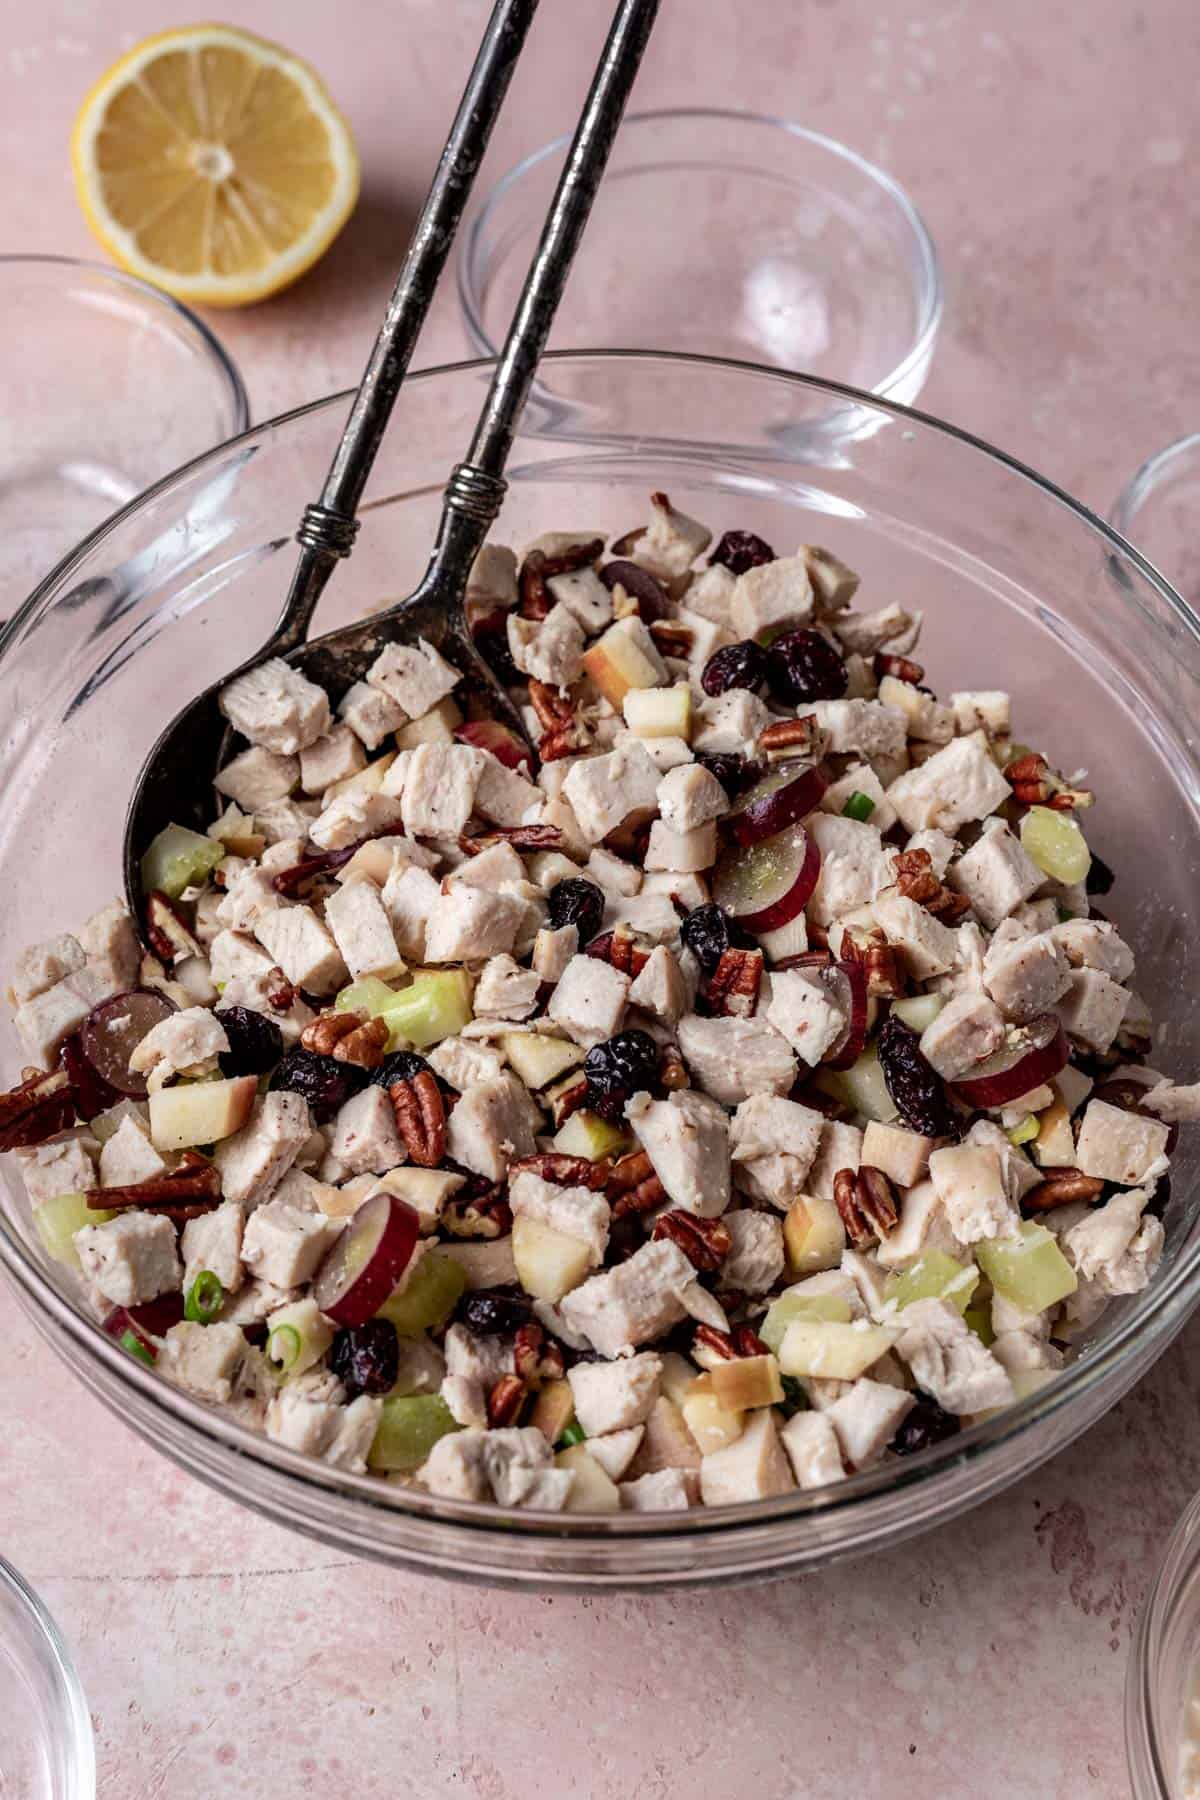 Chicken salad mixed together in a glass mixing bowl before adding the mayonnaise.